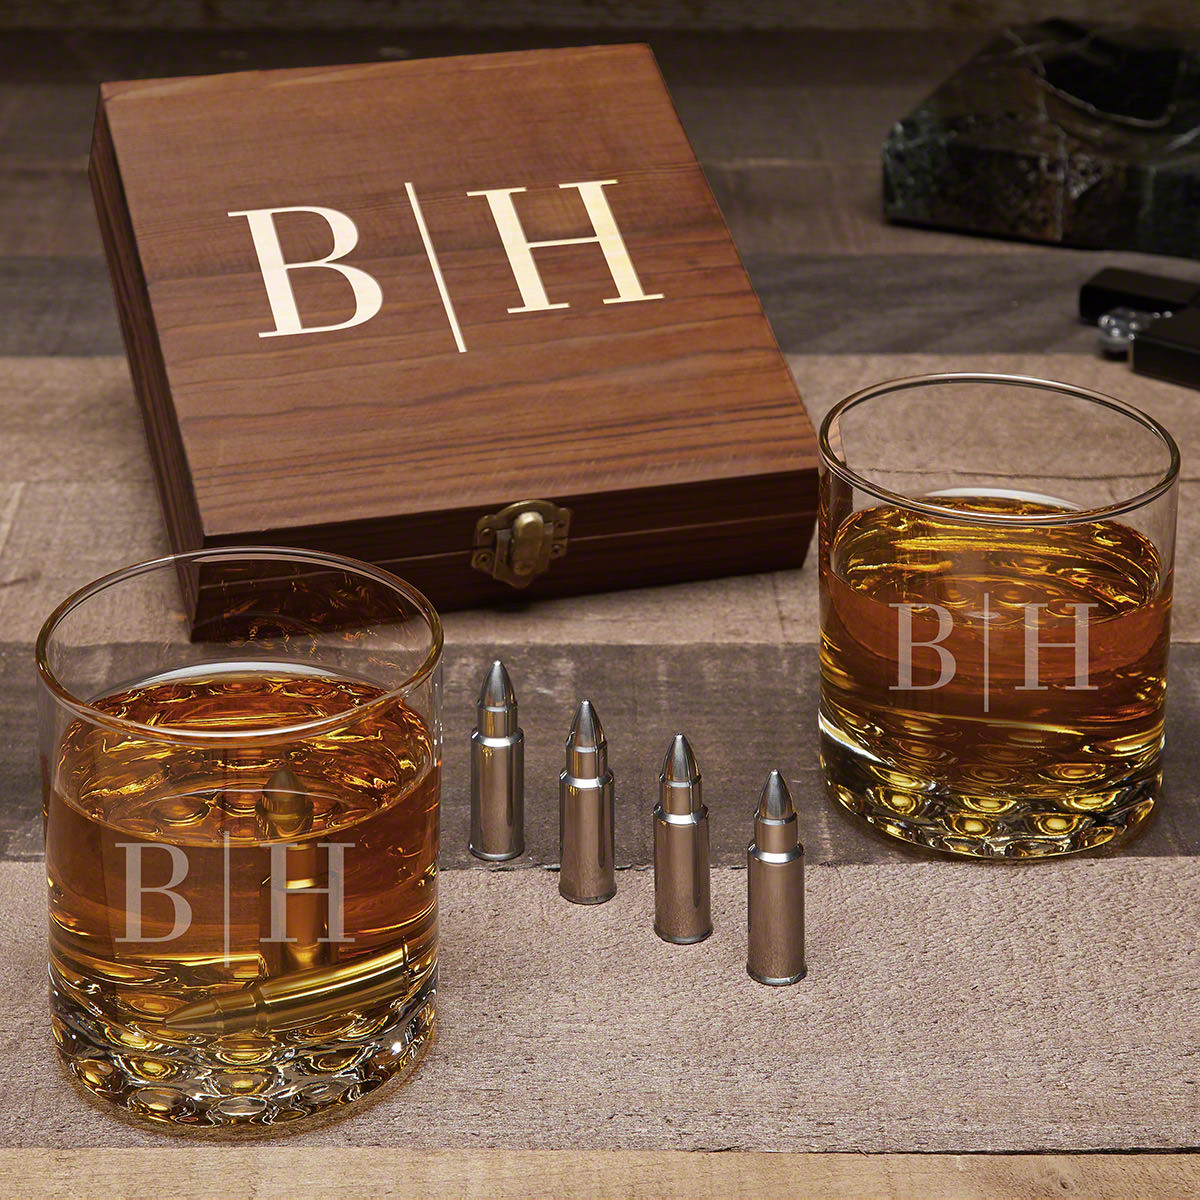 Quinton Personalized Whiskey Gift Set with Bullet Whiskey Stones and Buckman Glasses